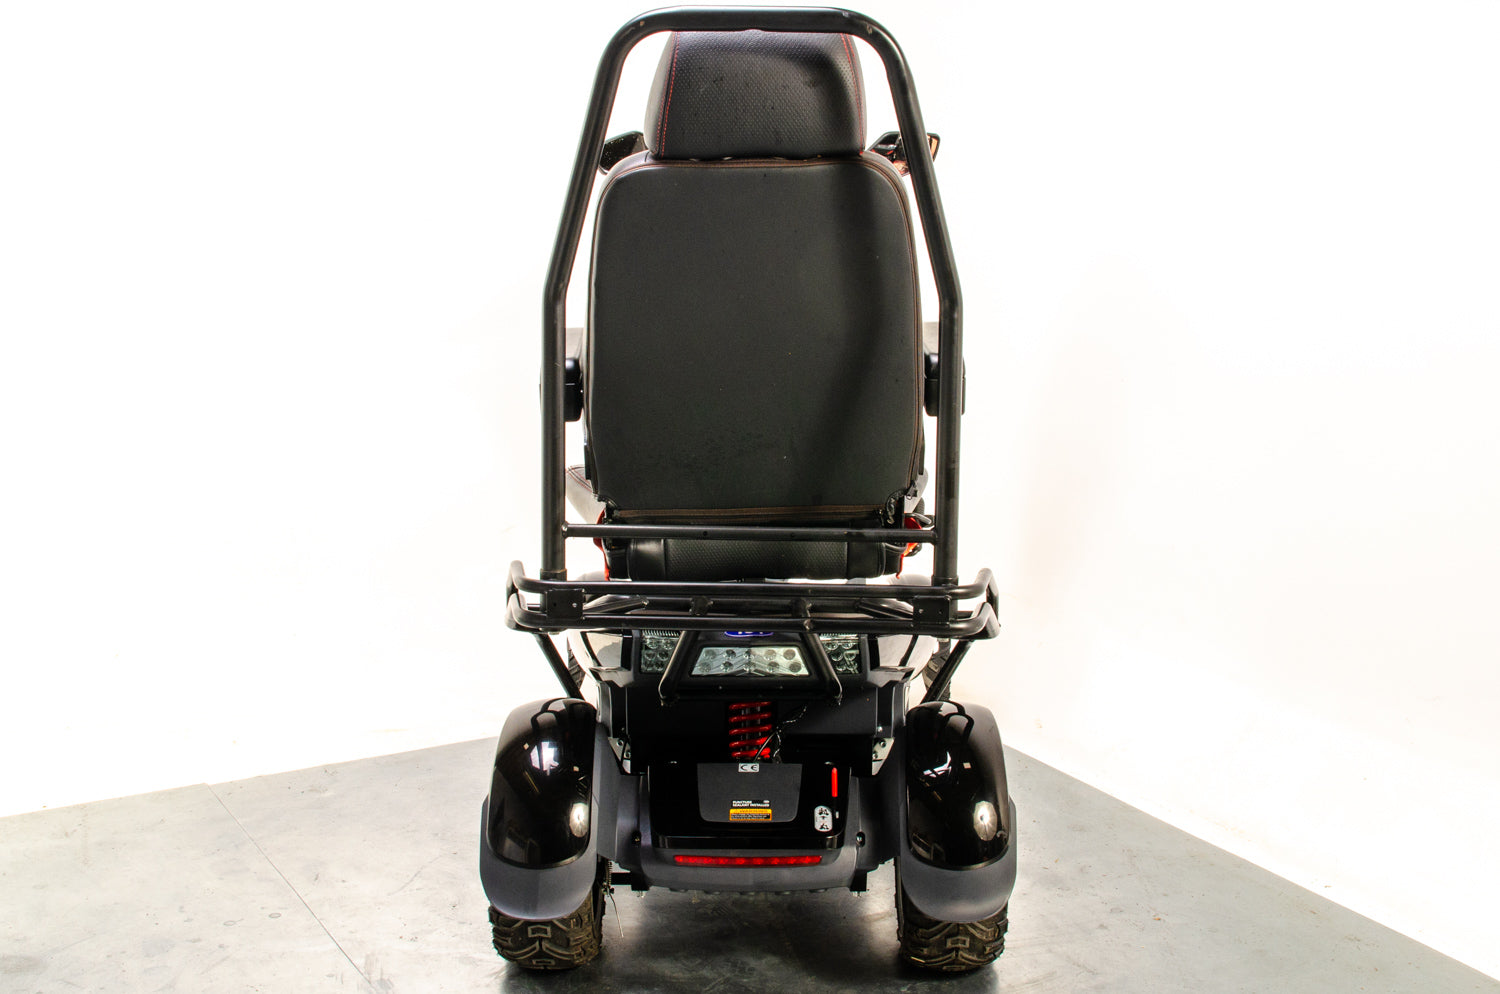 2020 TGA Vita X Used Mobility Scooter 8mph All-Terrain Off-Road Large Road Legal 13299